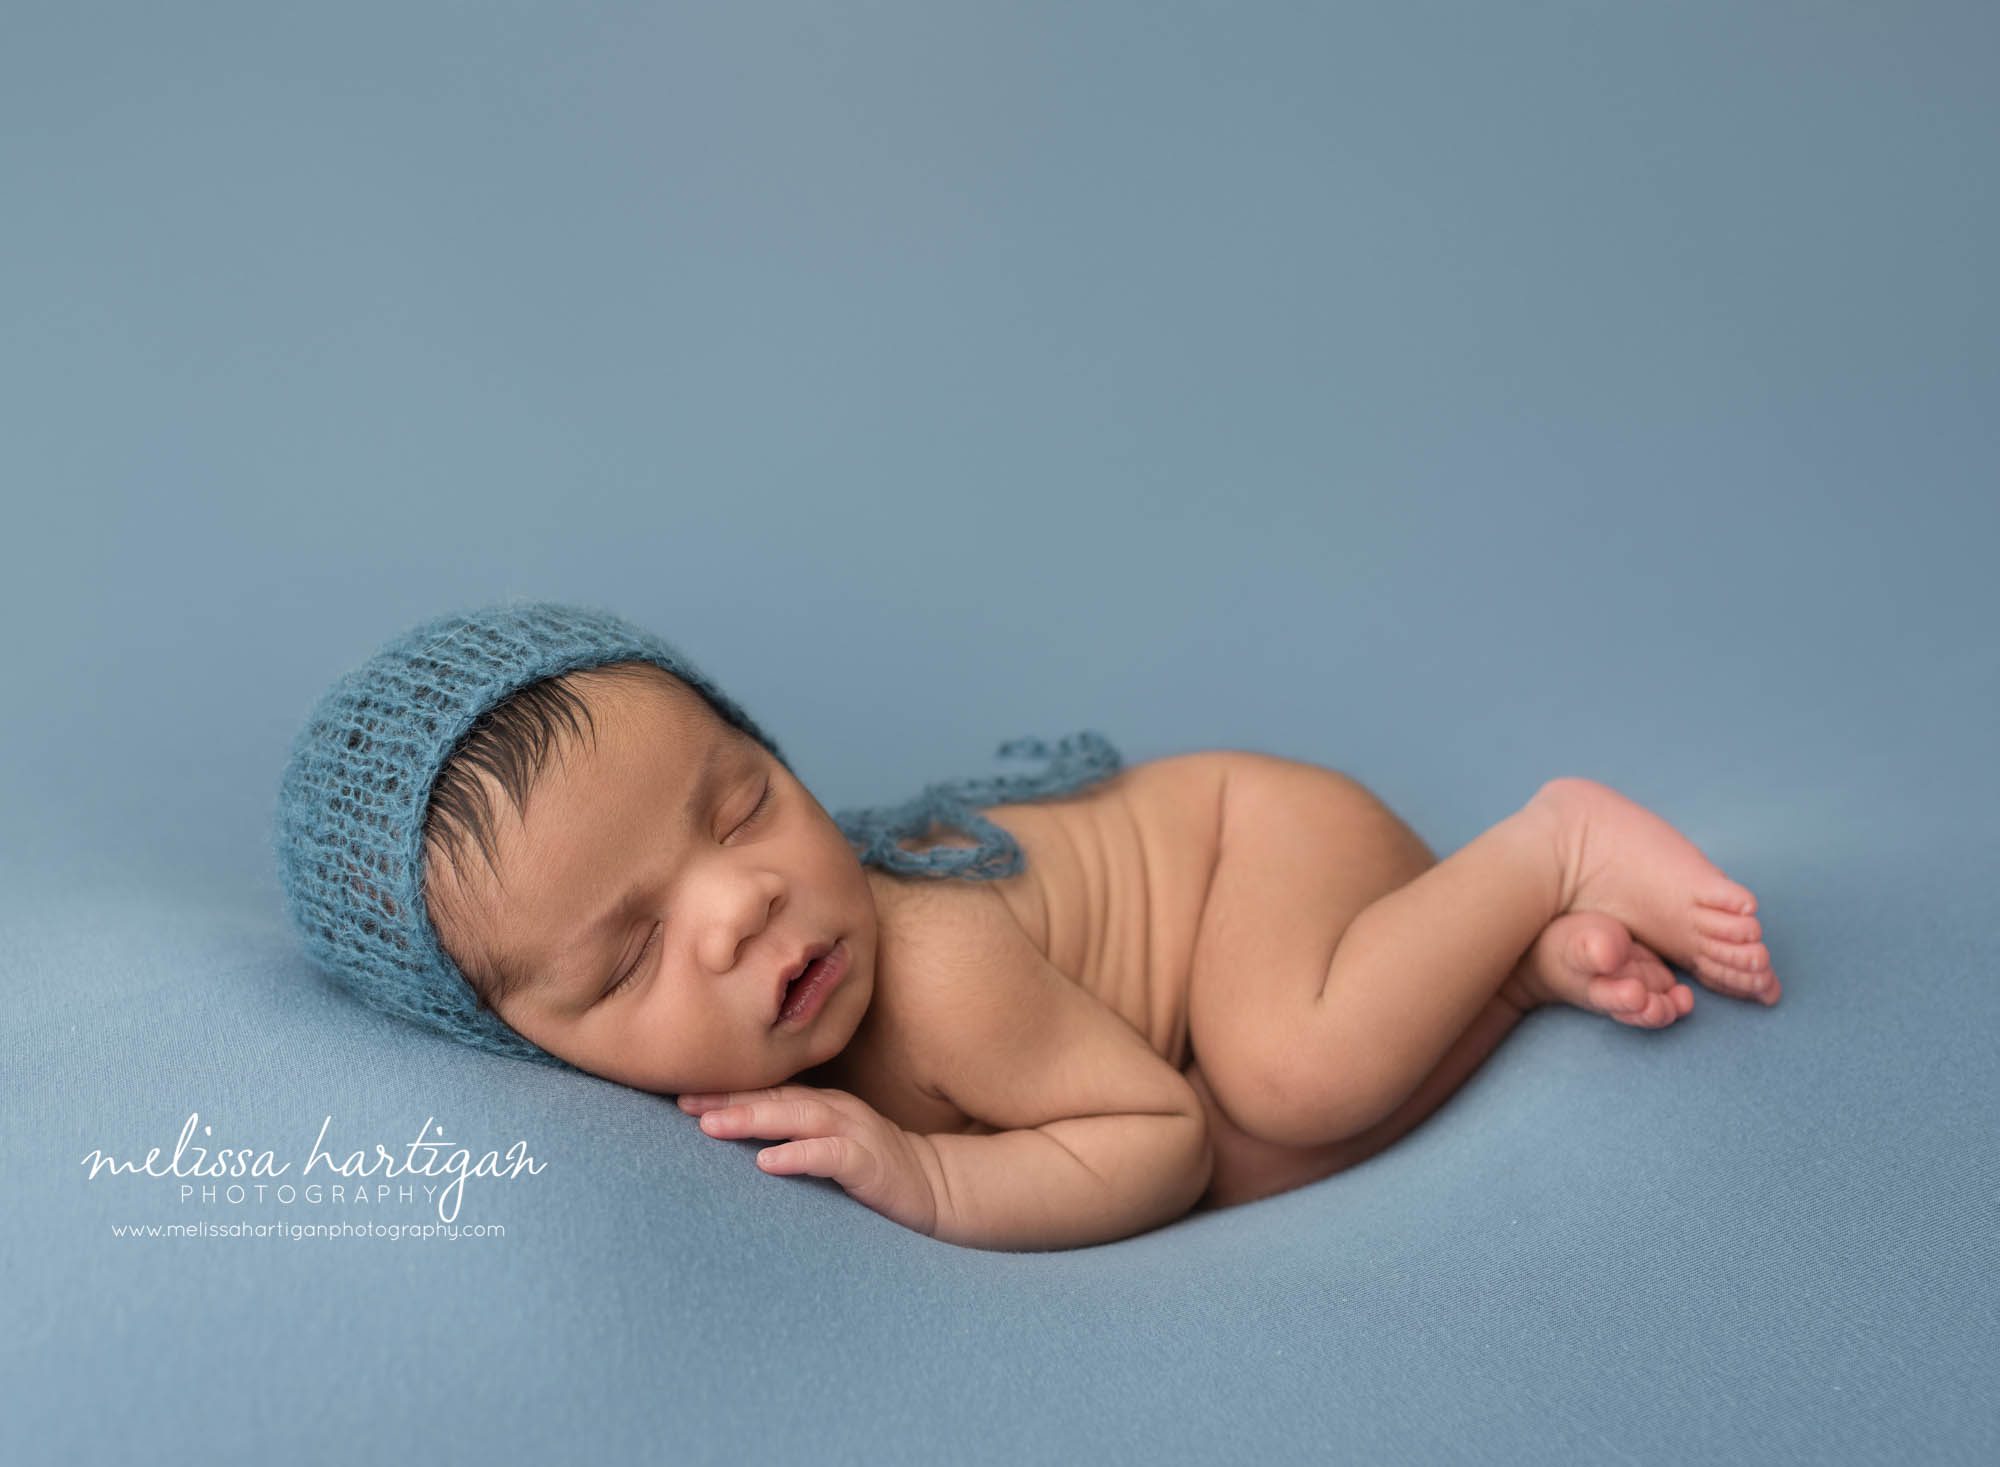 newborn baby boy posed on blue backdrop wearing blue knitted baby bonnet newborn photography rocky hill CT